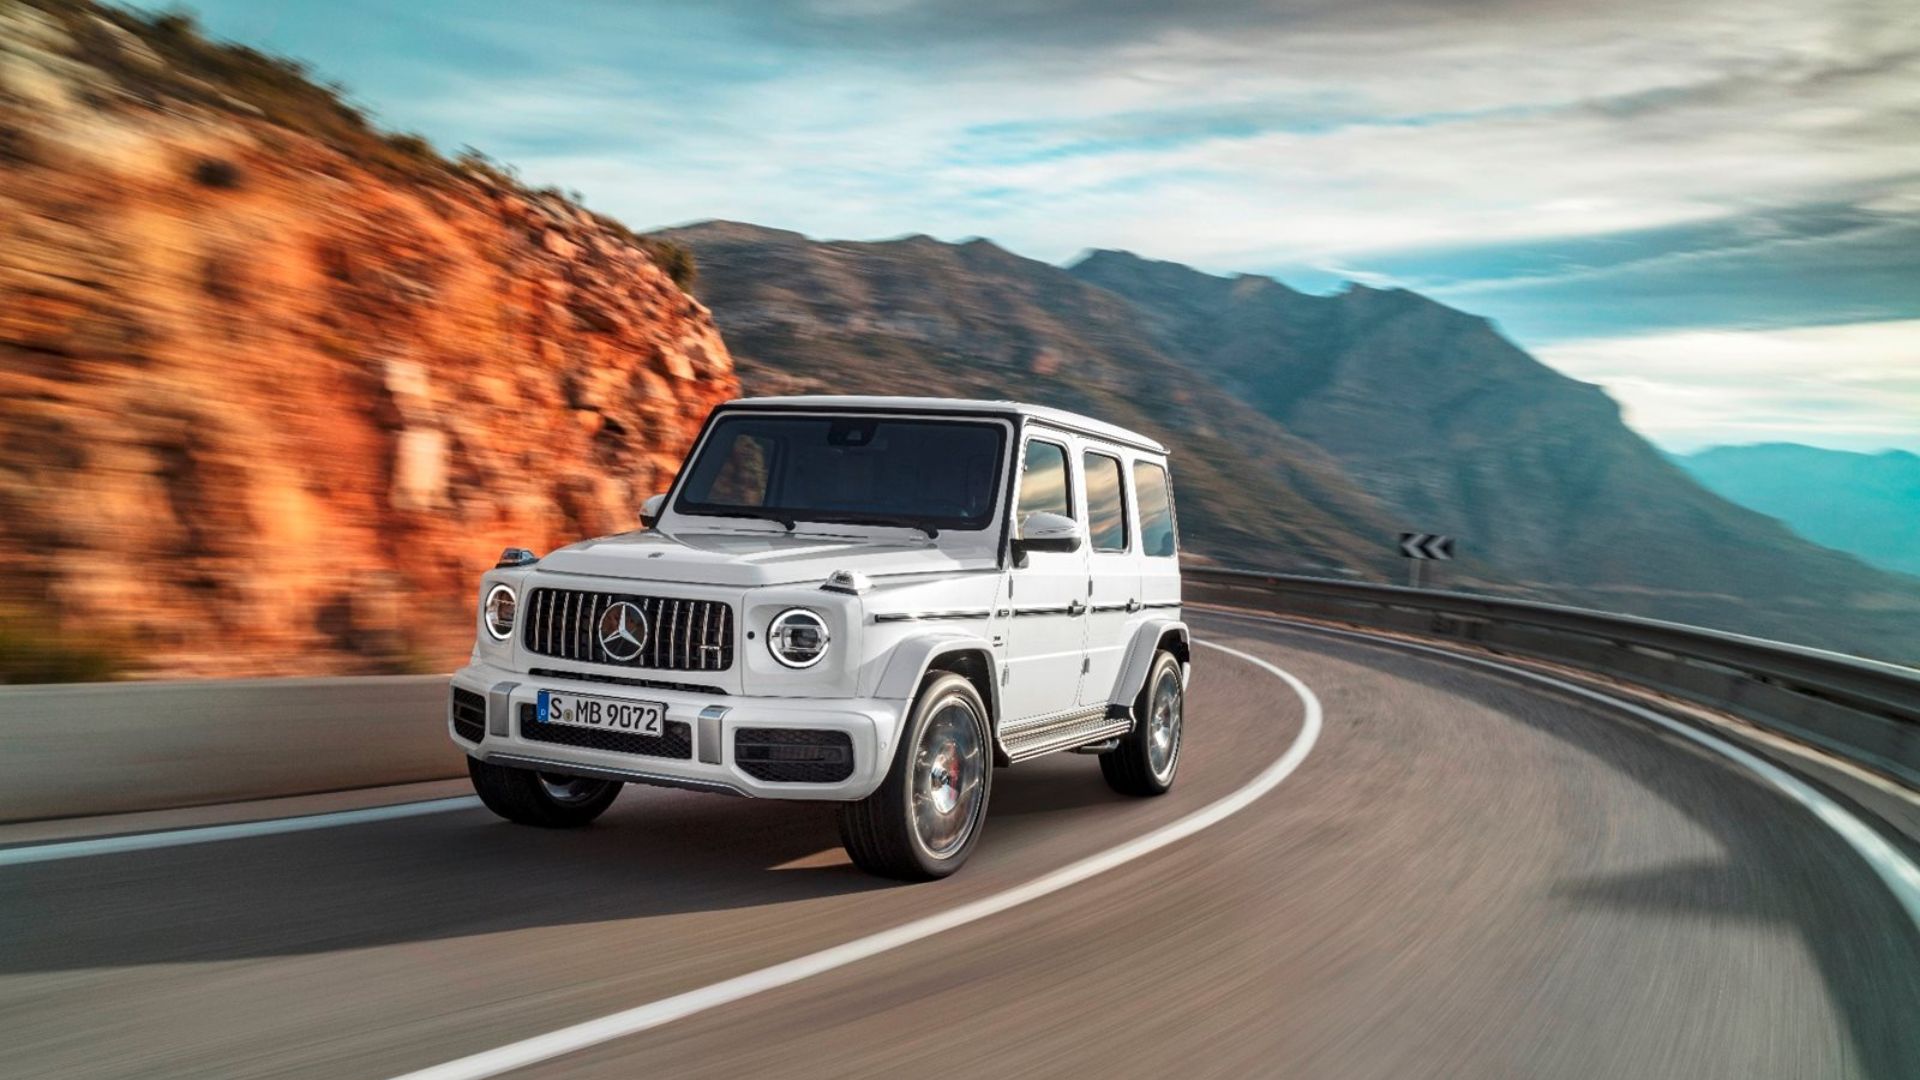 Why Should You Rеnt a G63 for Your Nеxt Road Trip